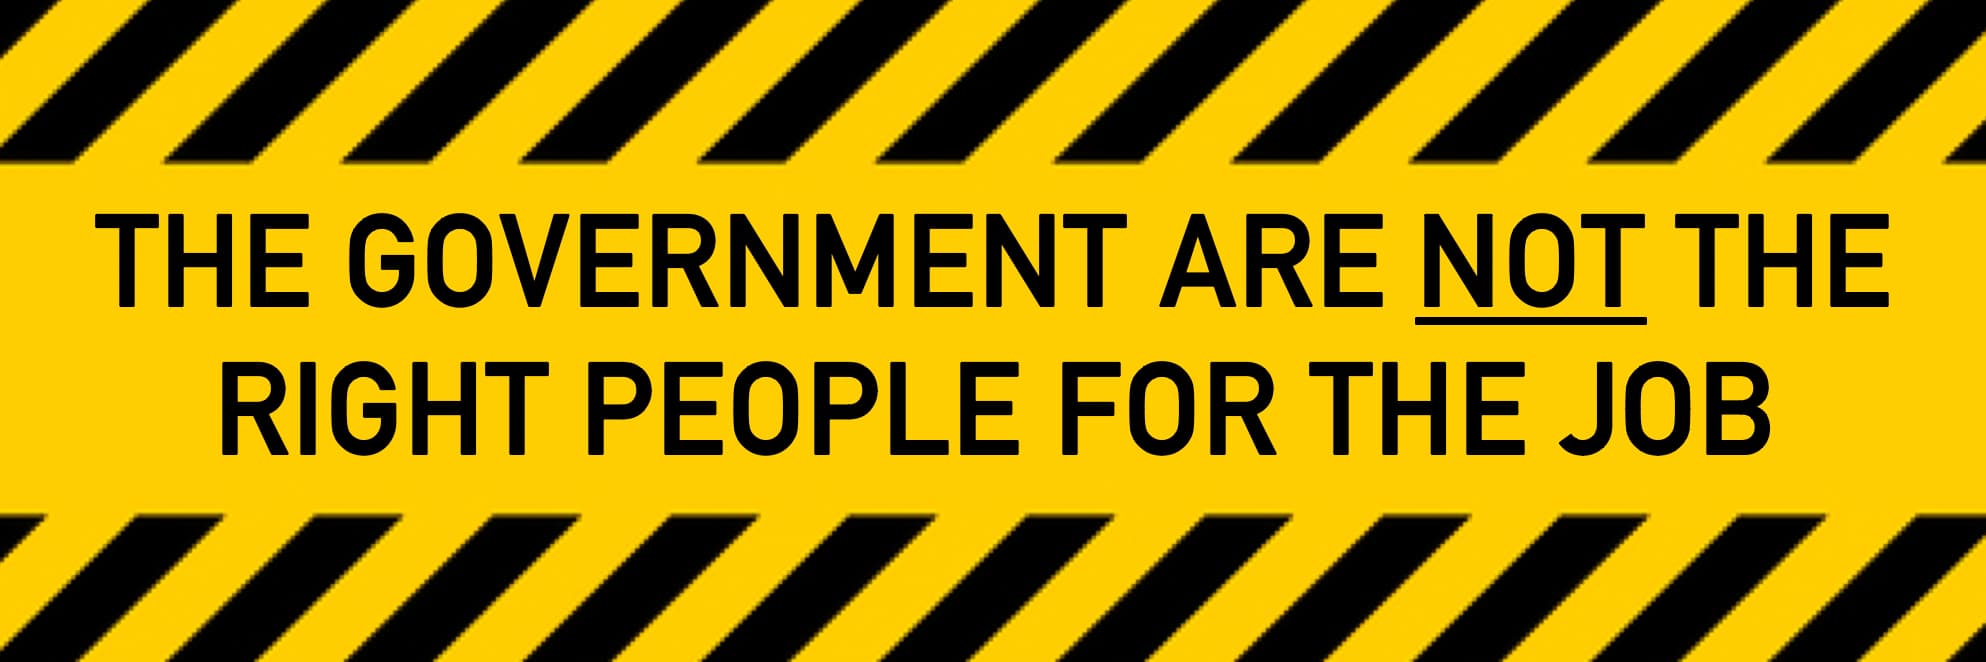 HEADER READS - THE GOVERNMENT ARE NOT THE RIGHT PEOPLE FOR THE JOB